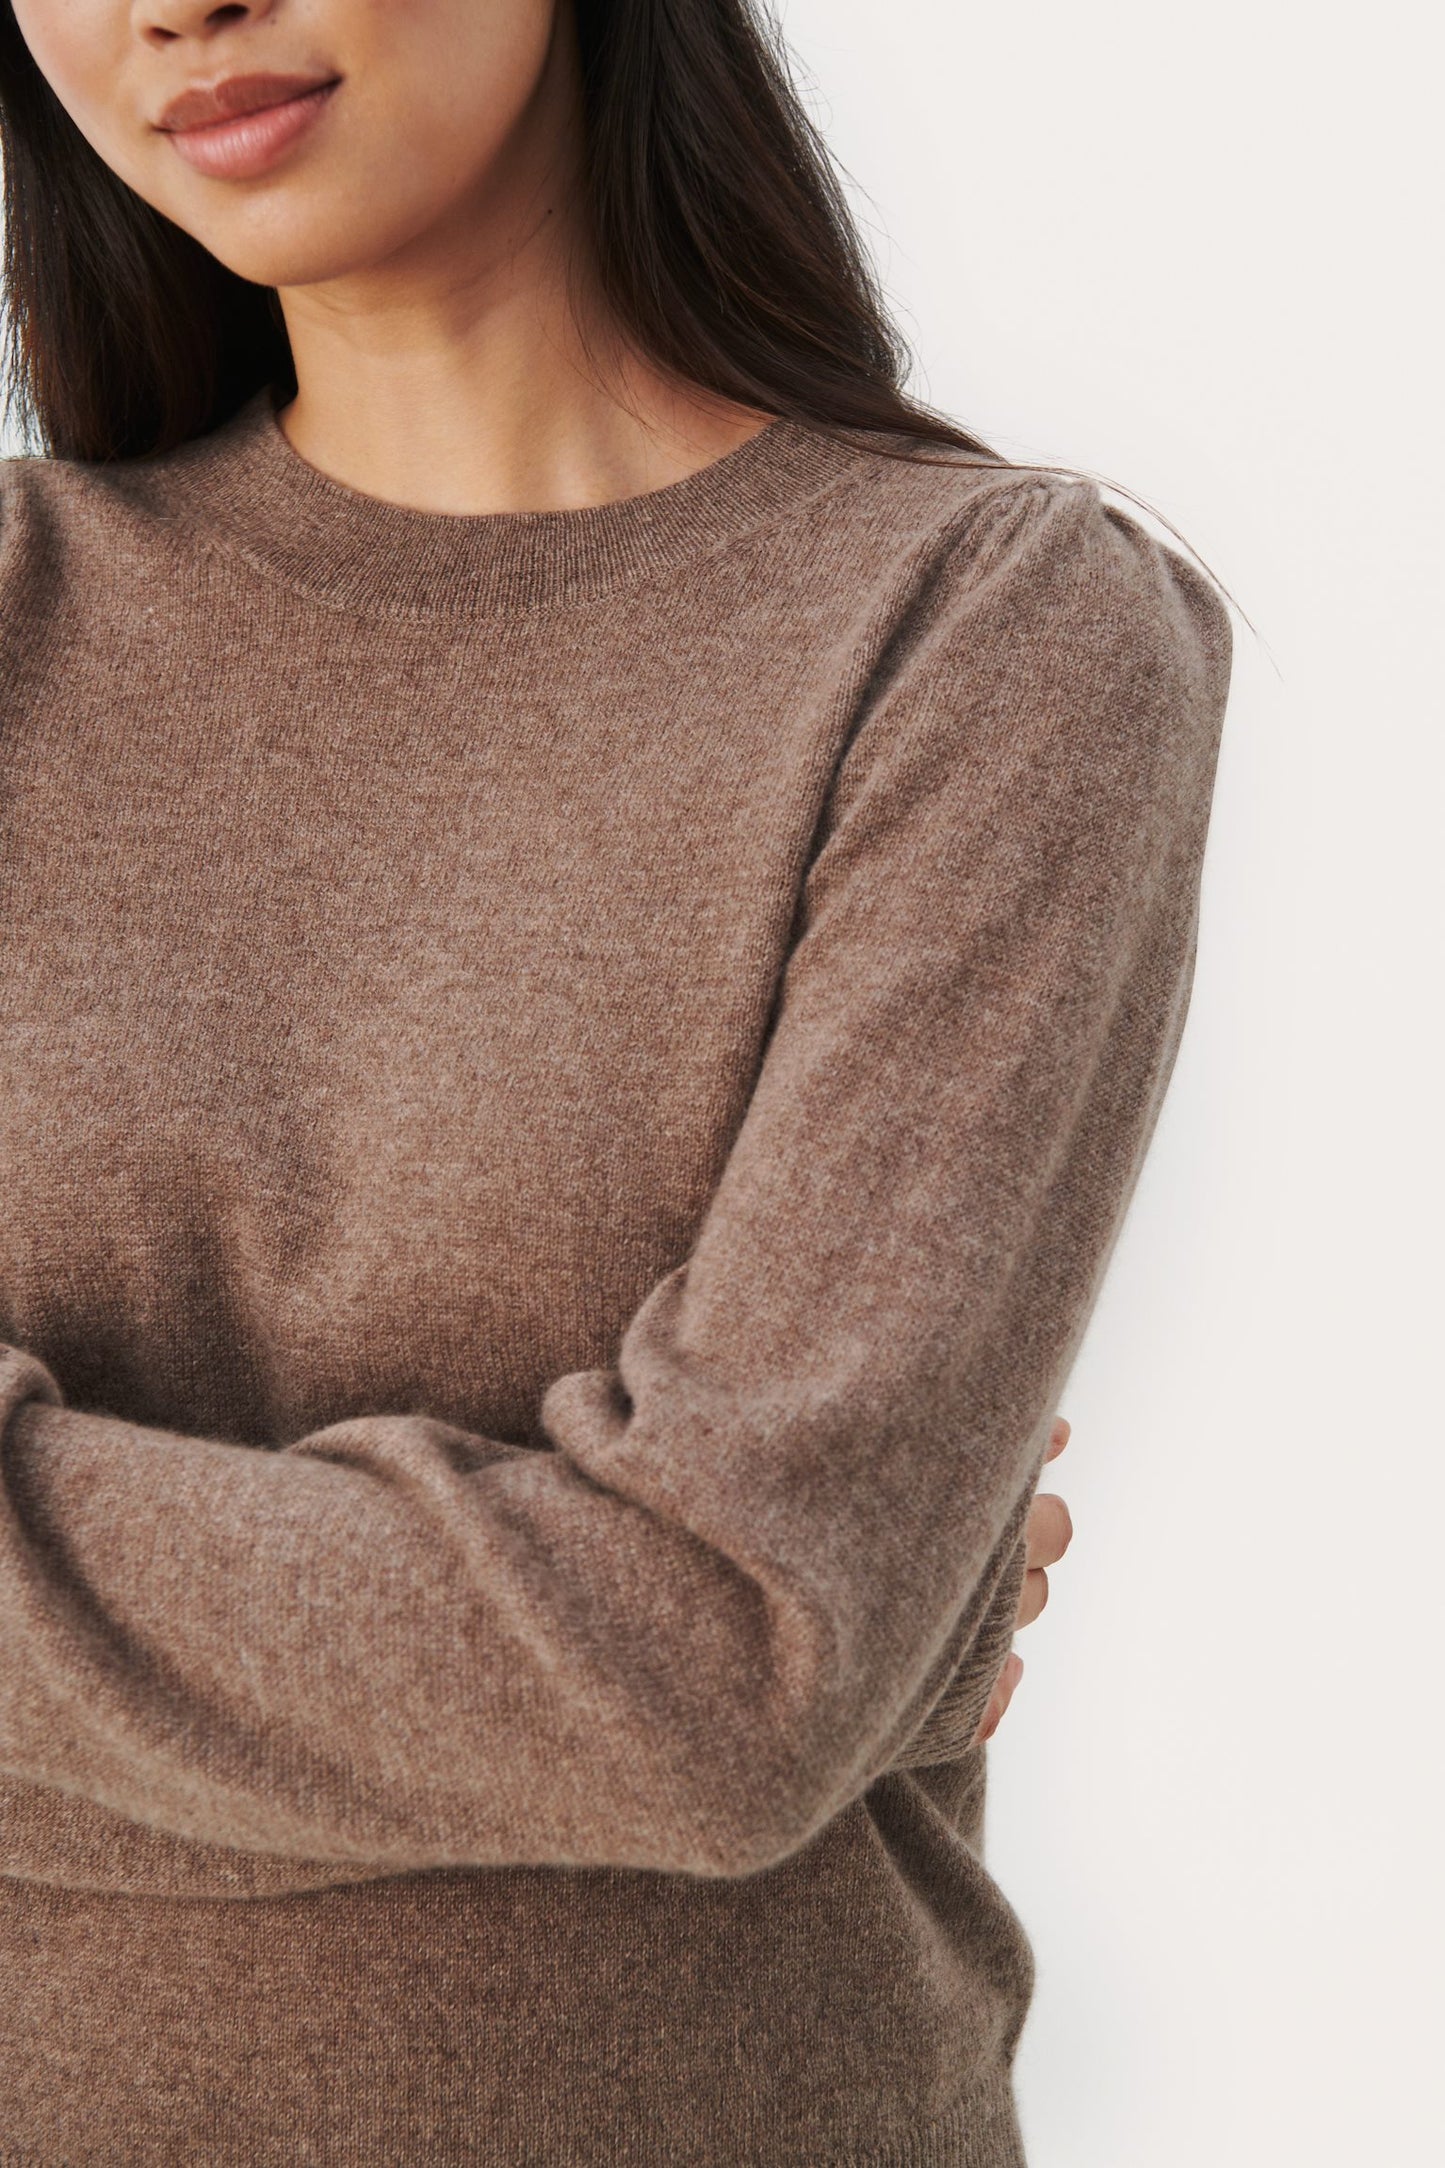 Evina 100% Cashmere Knit - Part Two